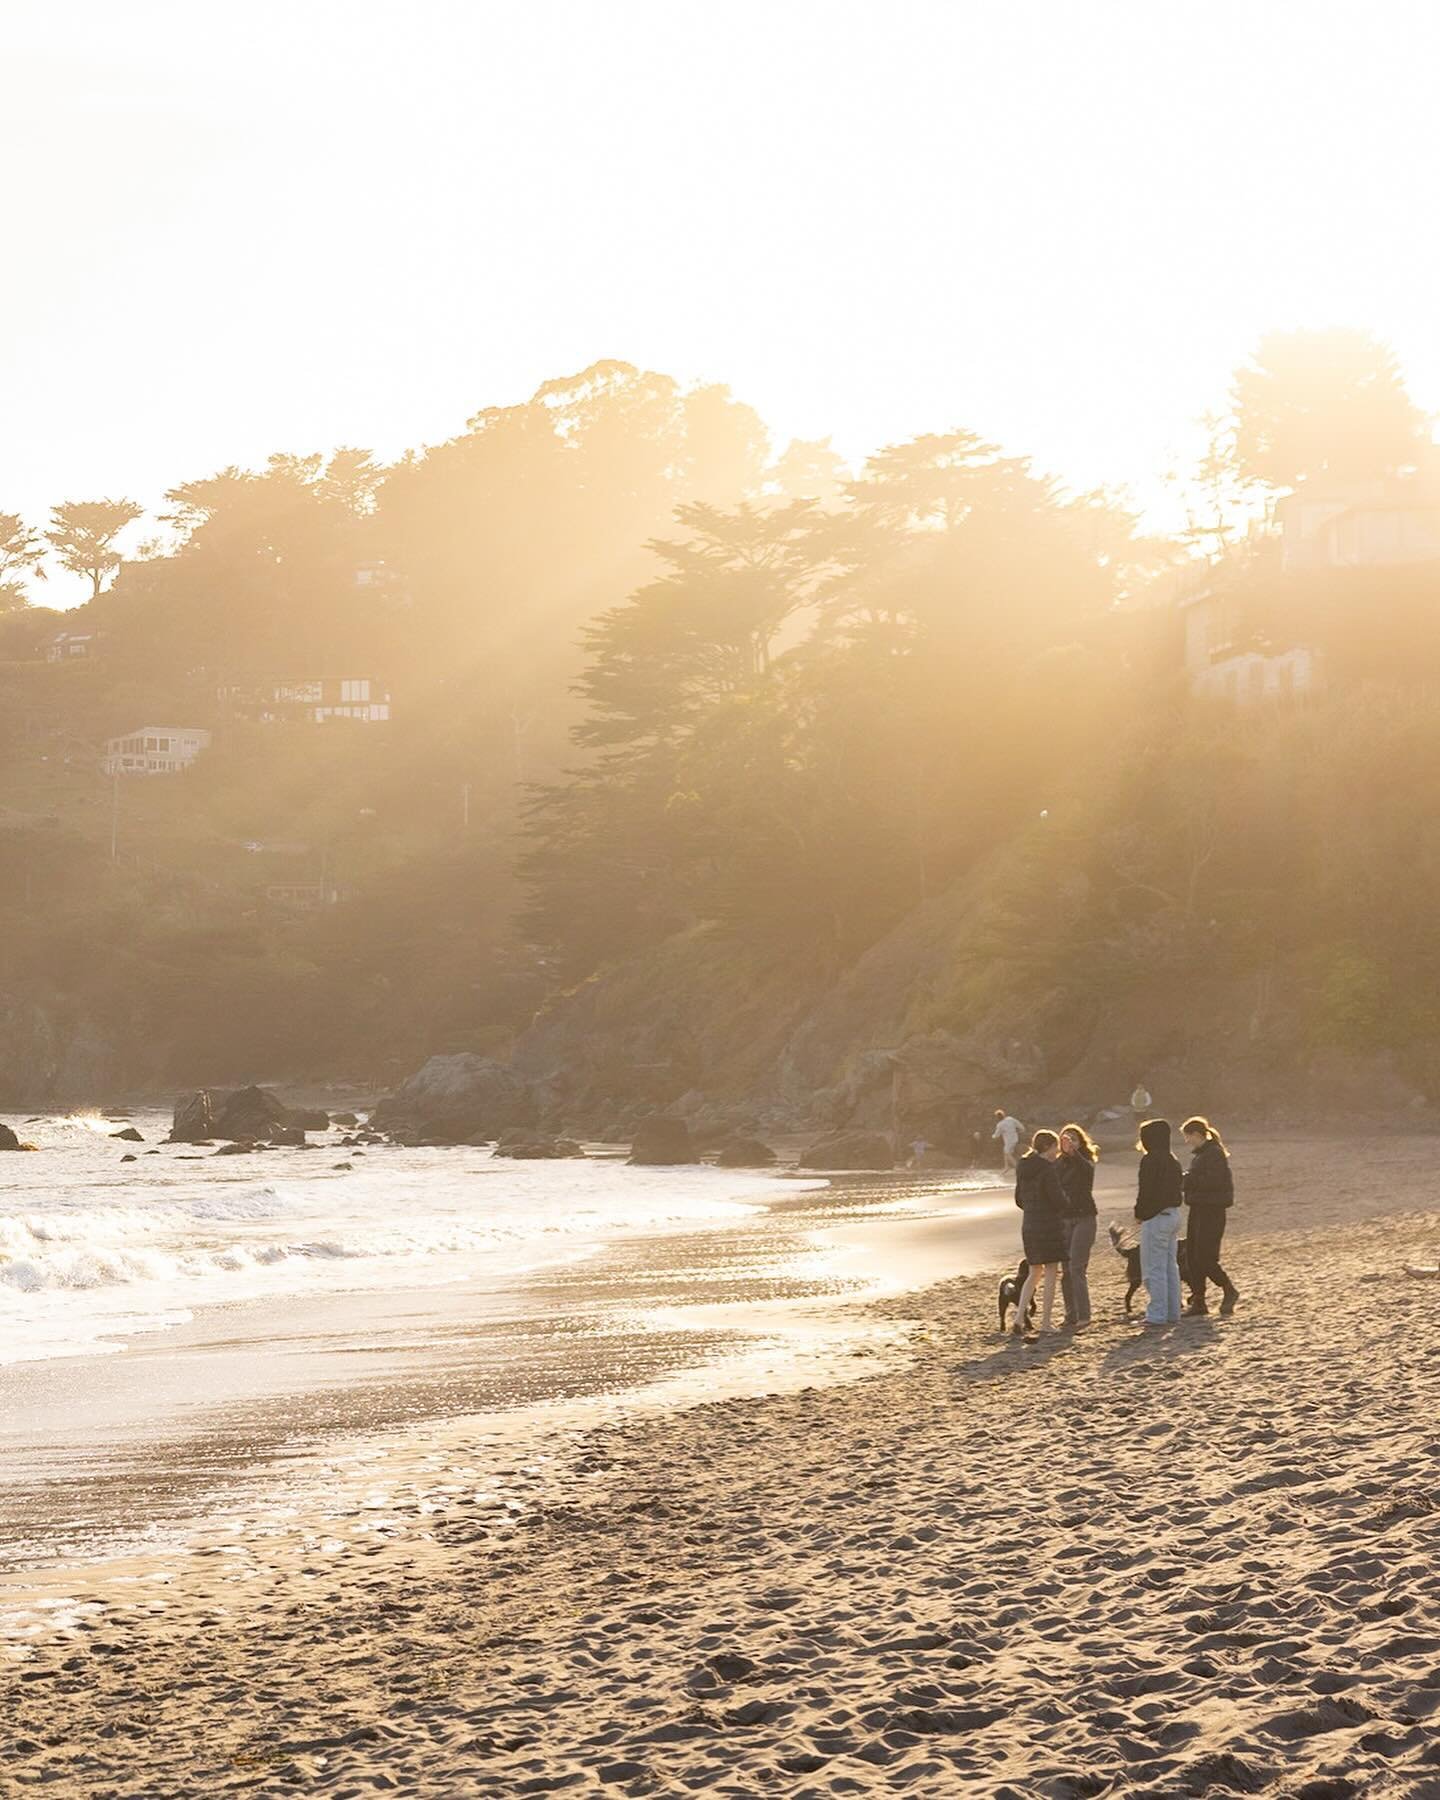 I will be taking the next Families in the Wild to Muir beach for a bonfire on April 28. Join me for a relaxing moment at my favorite beach while I take beautiful photos of your family. I have only 2 spots left!
.
.
.
.
#familyphotography #familyphoto